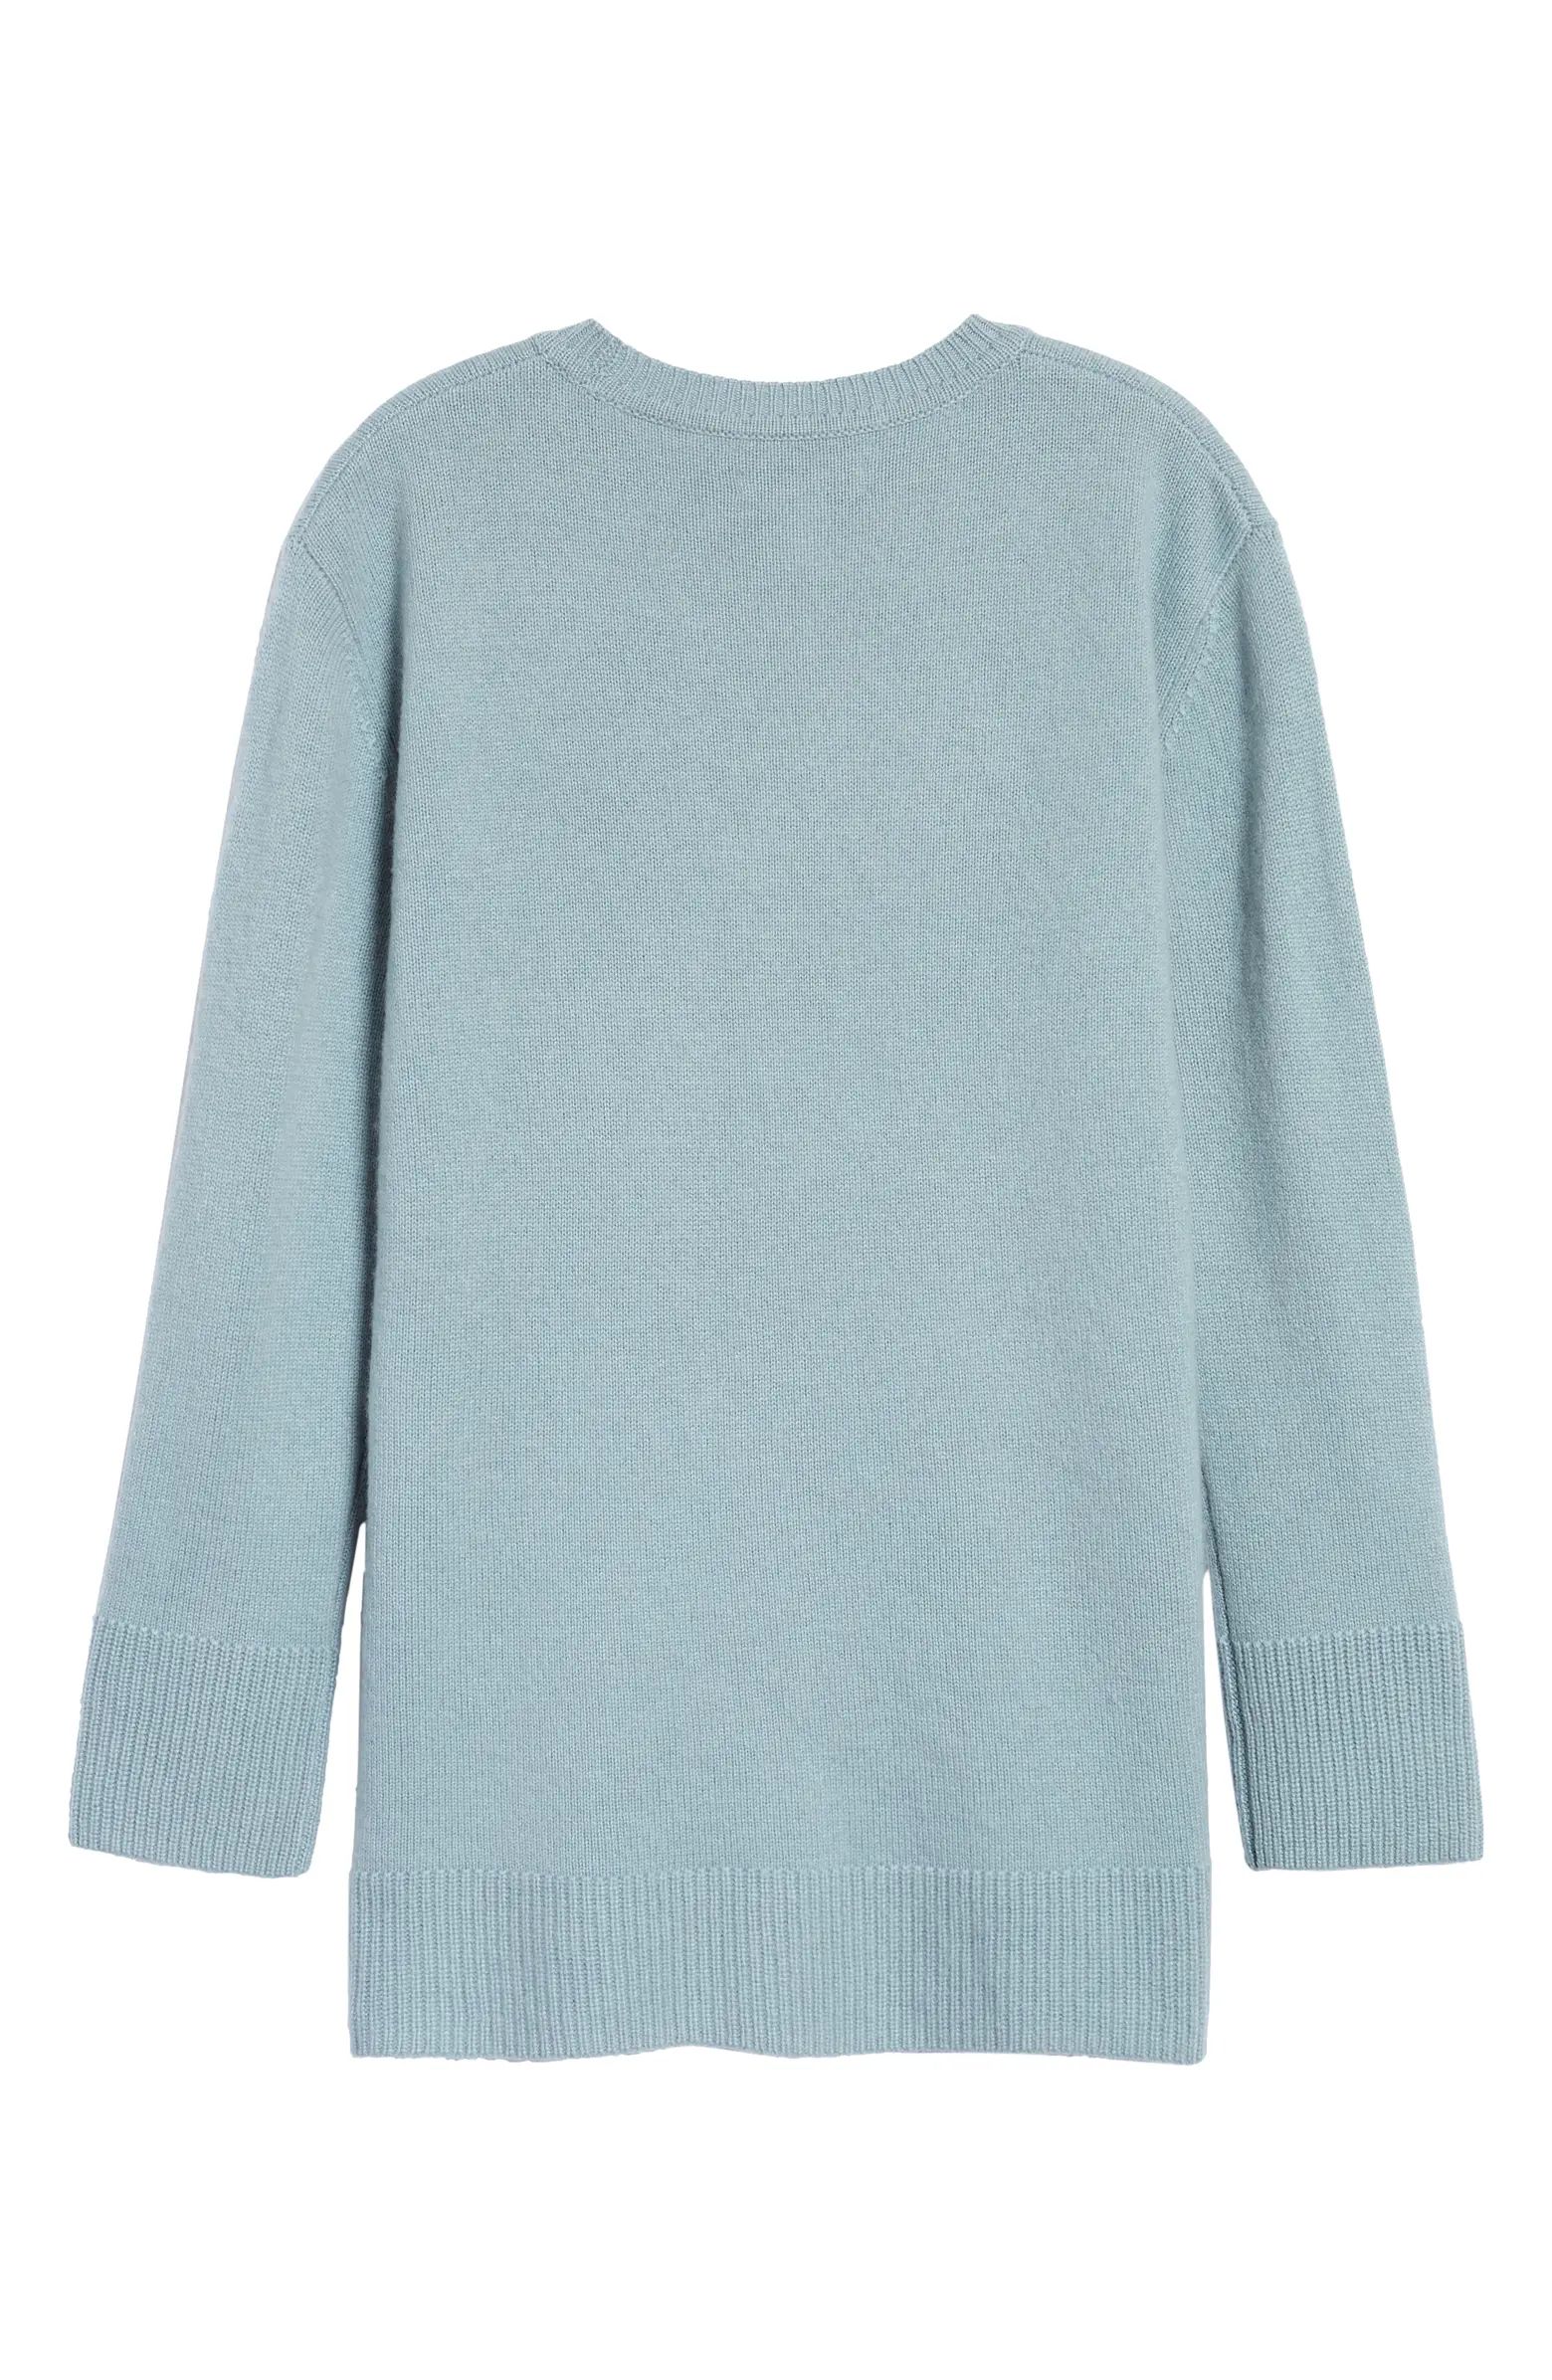 Cashmere Tunic Sweater | Nordstrom